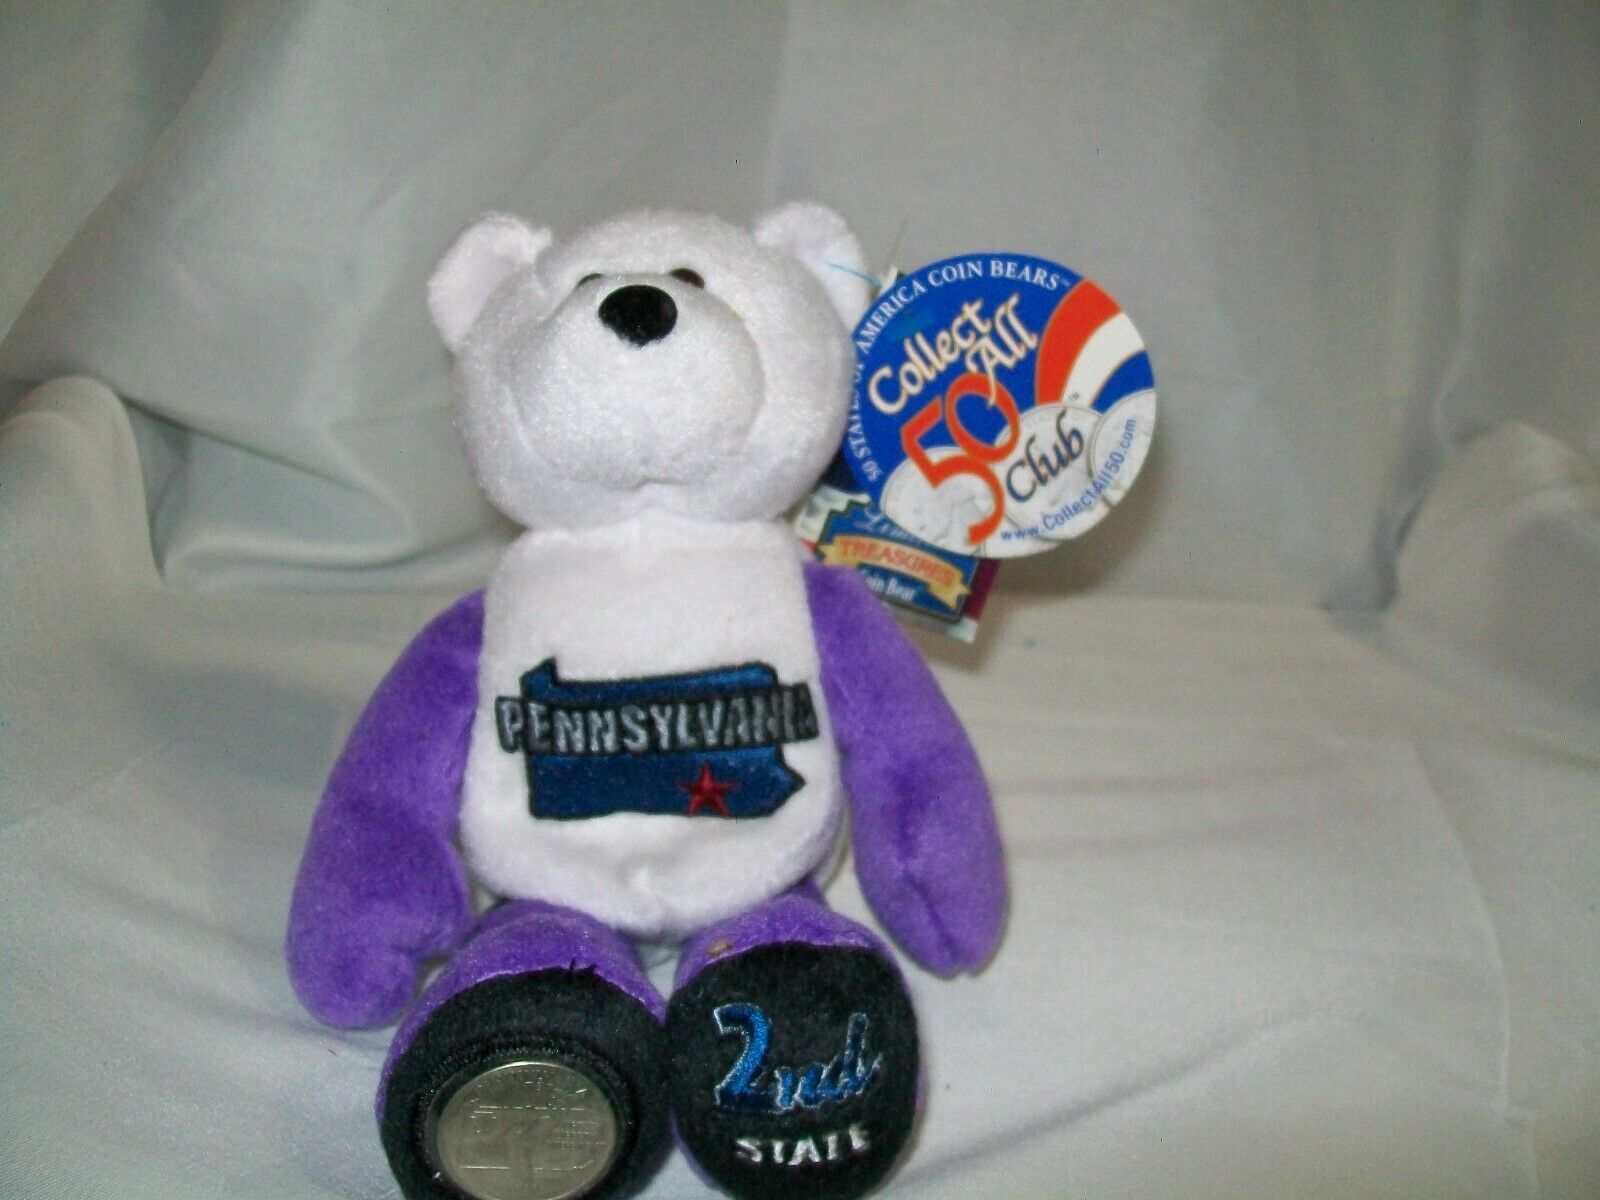 Brand New With Tags Pennsylvania 2nd State Limited Treasures Coin Bear